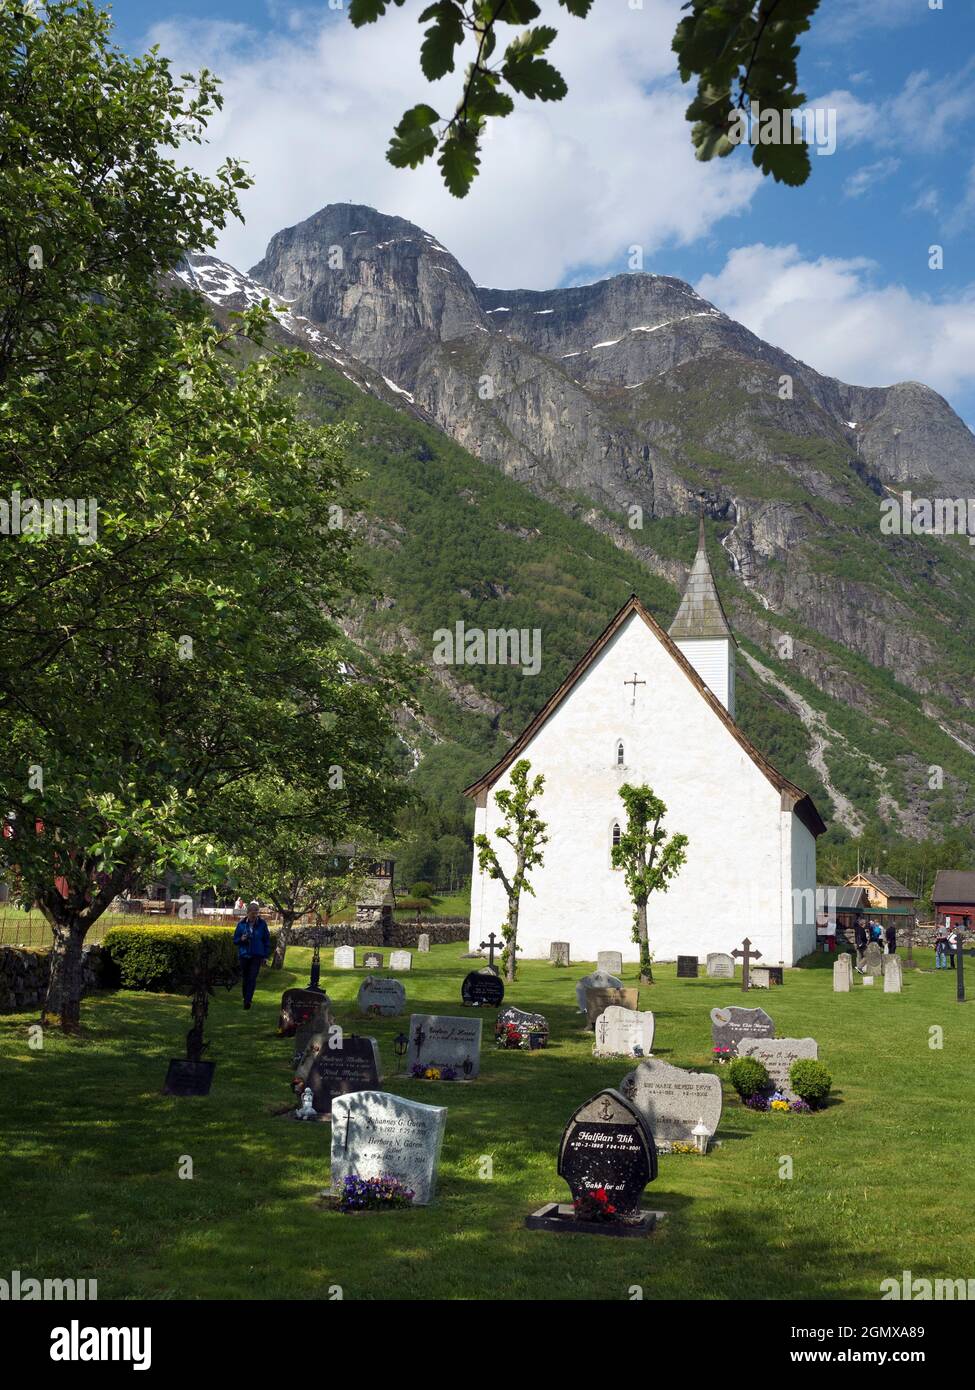 Eidfjord is a small town in Hardanger District, on the west coast of Norway. It is situated at the end of the Eidfjorden, an inner branch of the large Stock Photo